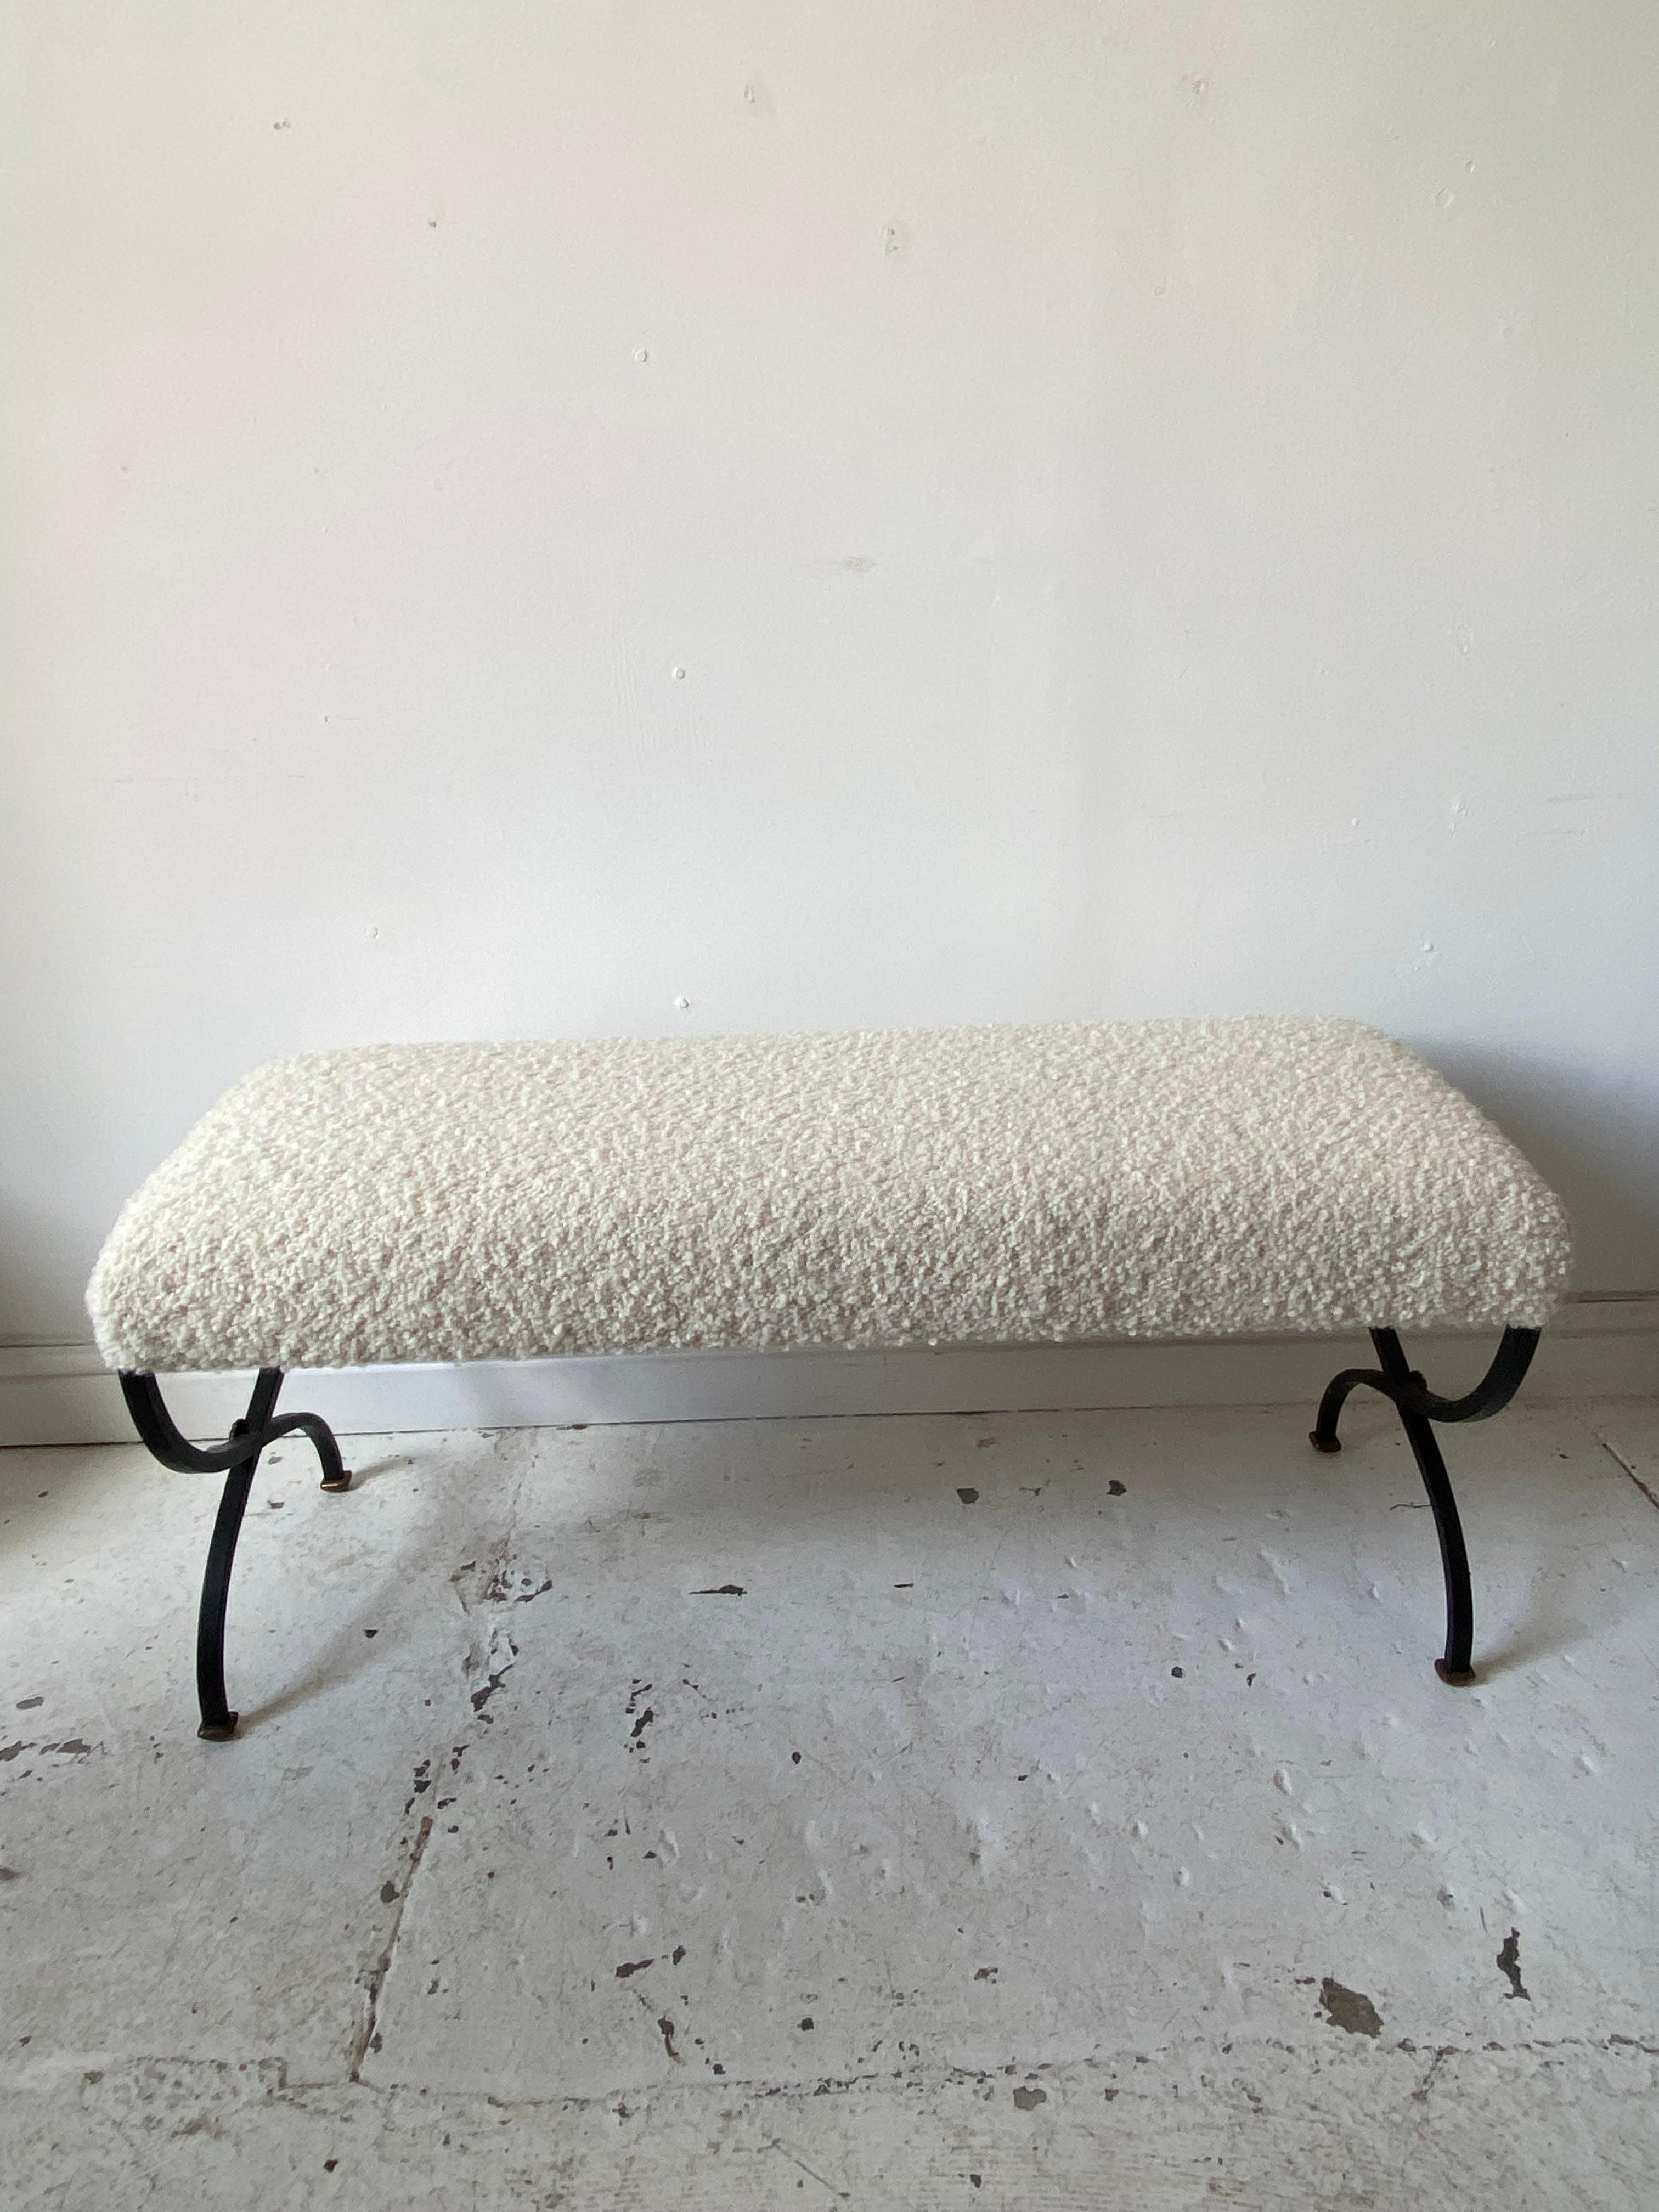 French Upholstered Entryway or Bedroom Bench Seat with Metal Cross Leg